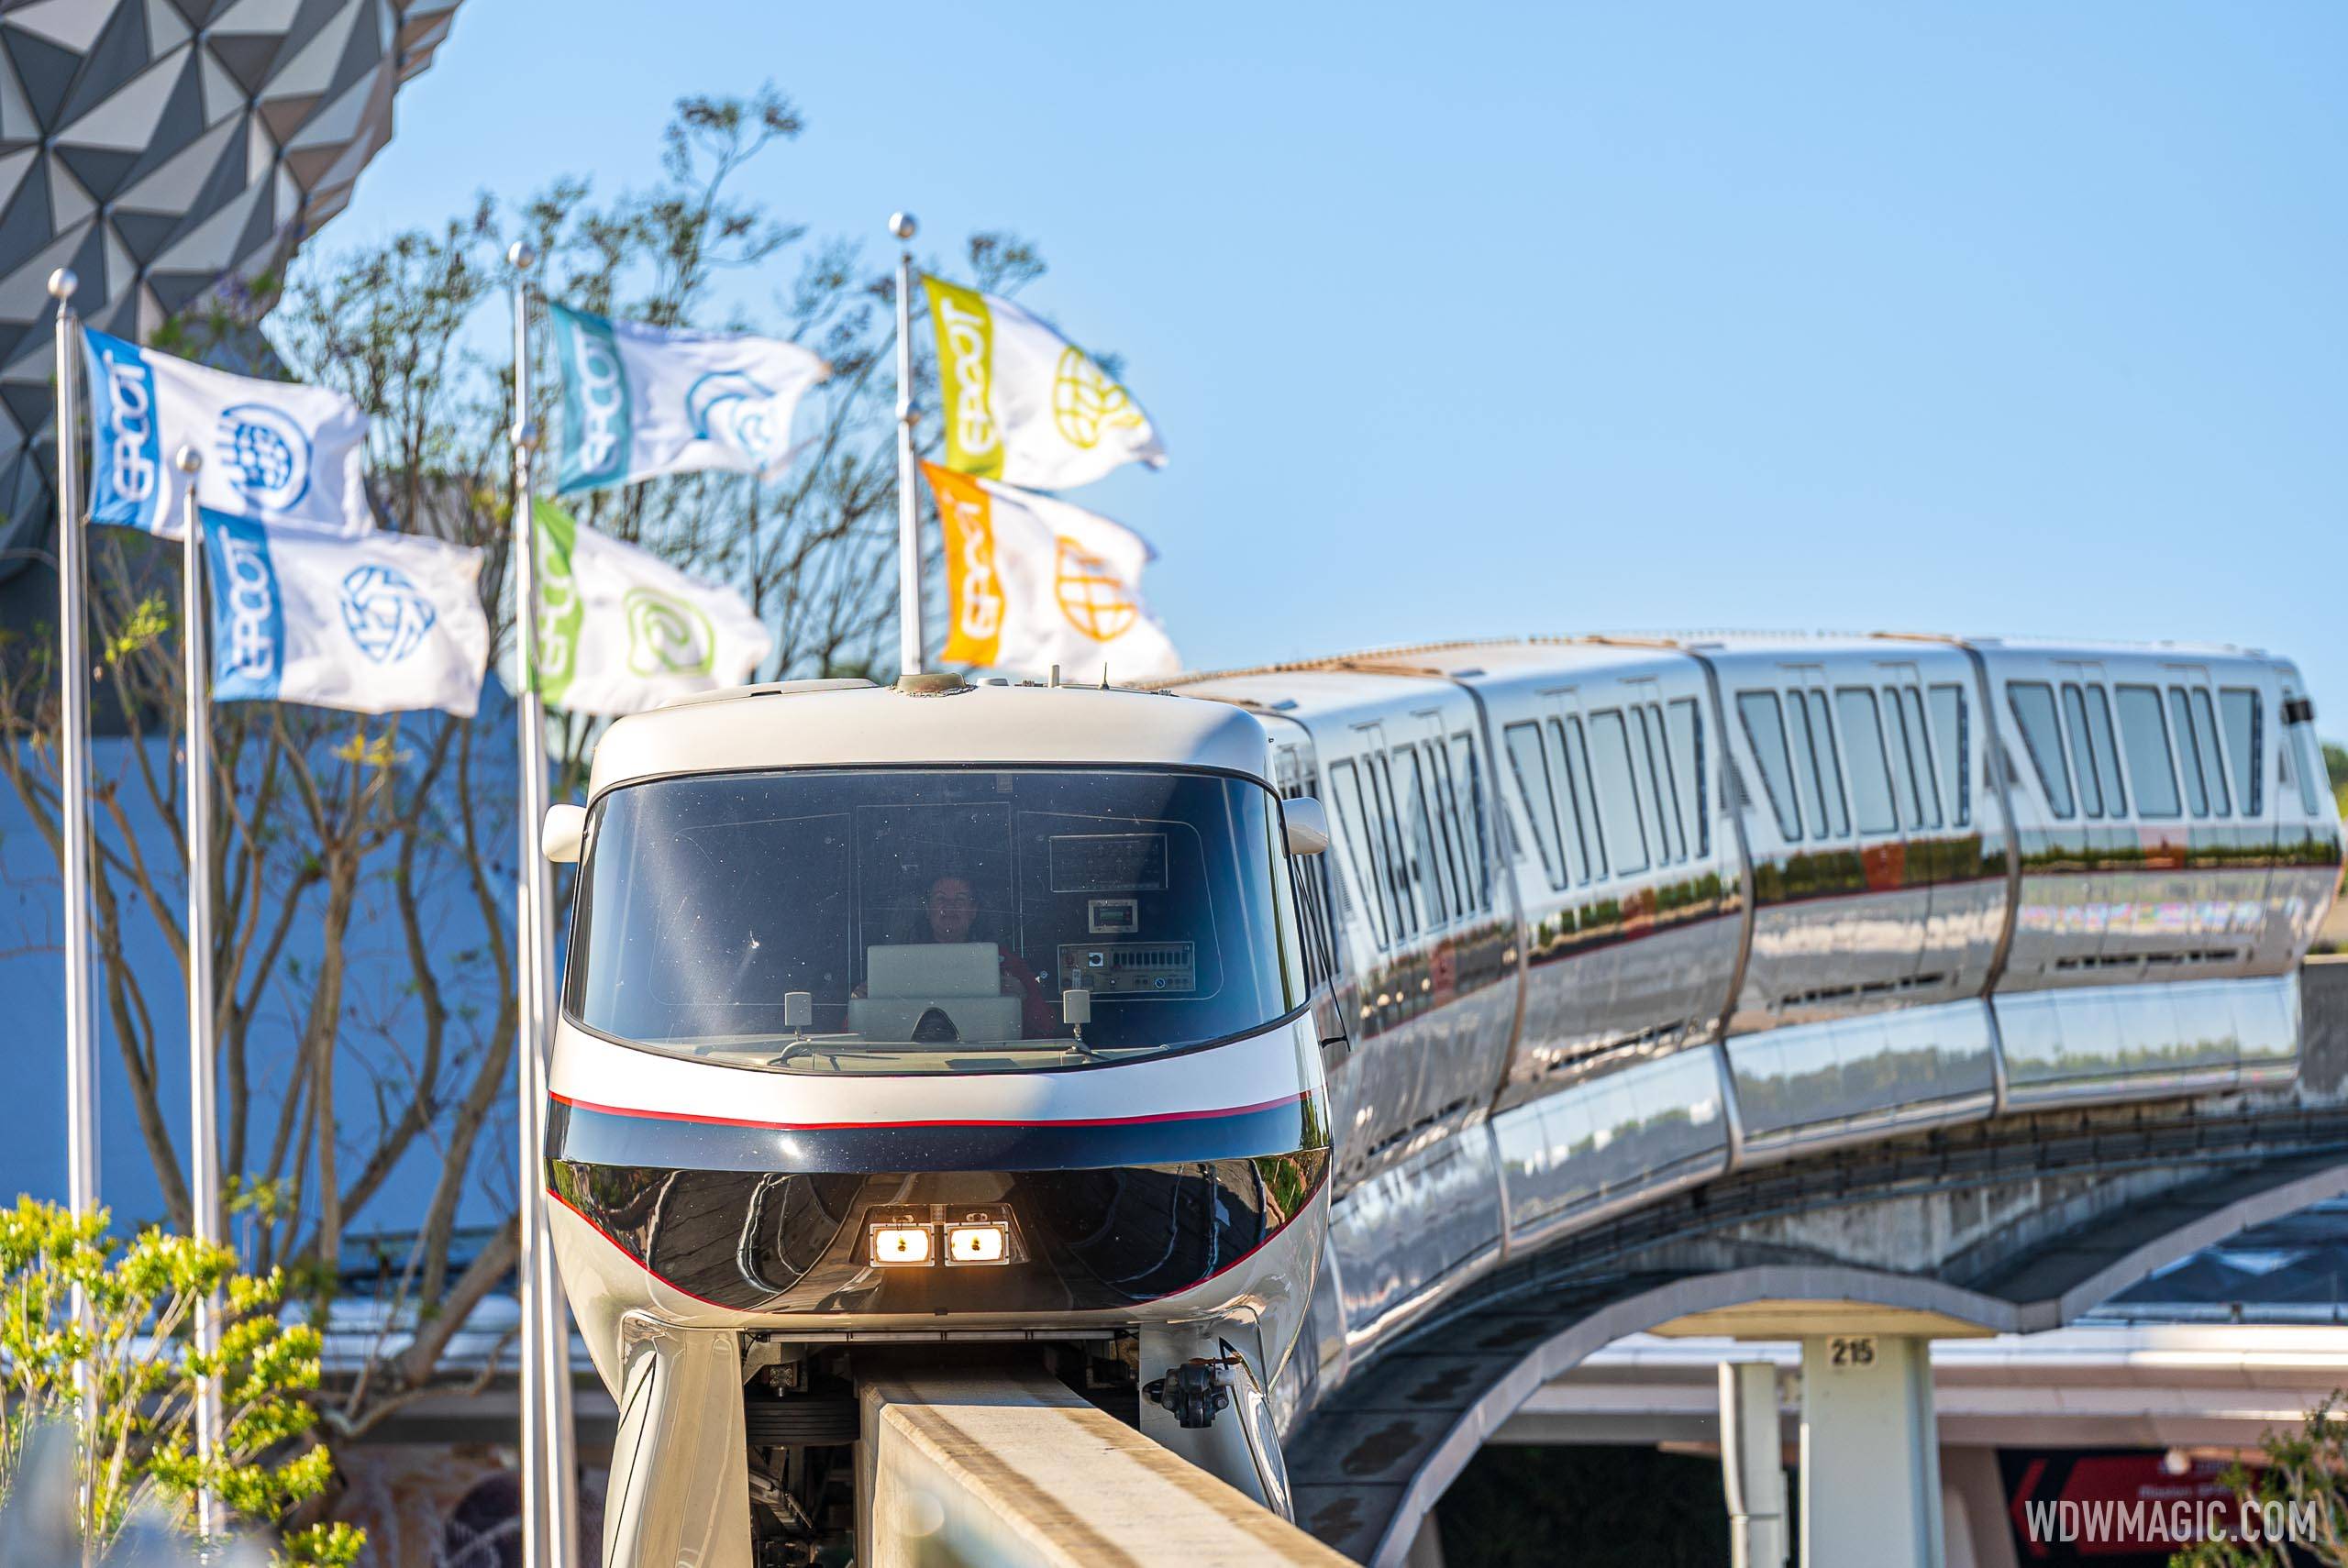 The Walt Disney World Monorail System is now being inspected by the FDOT